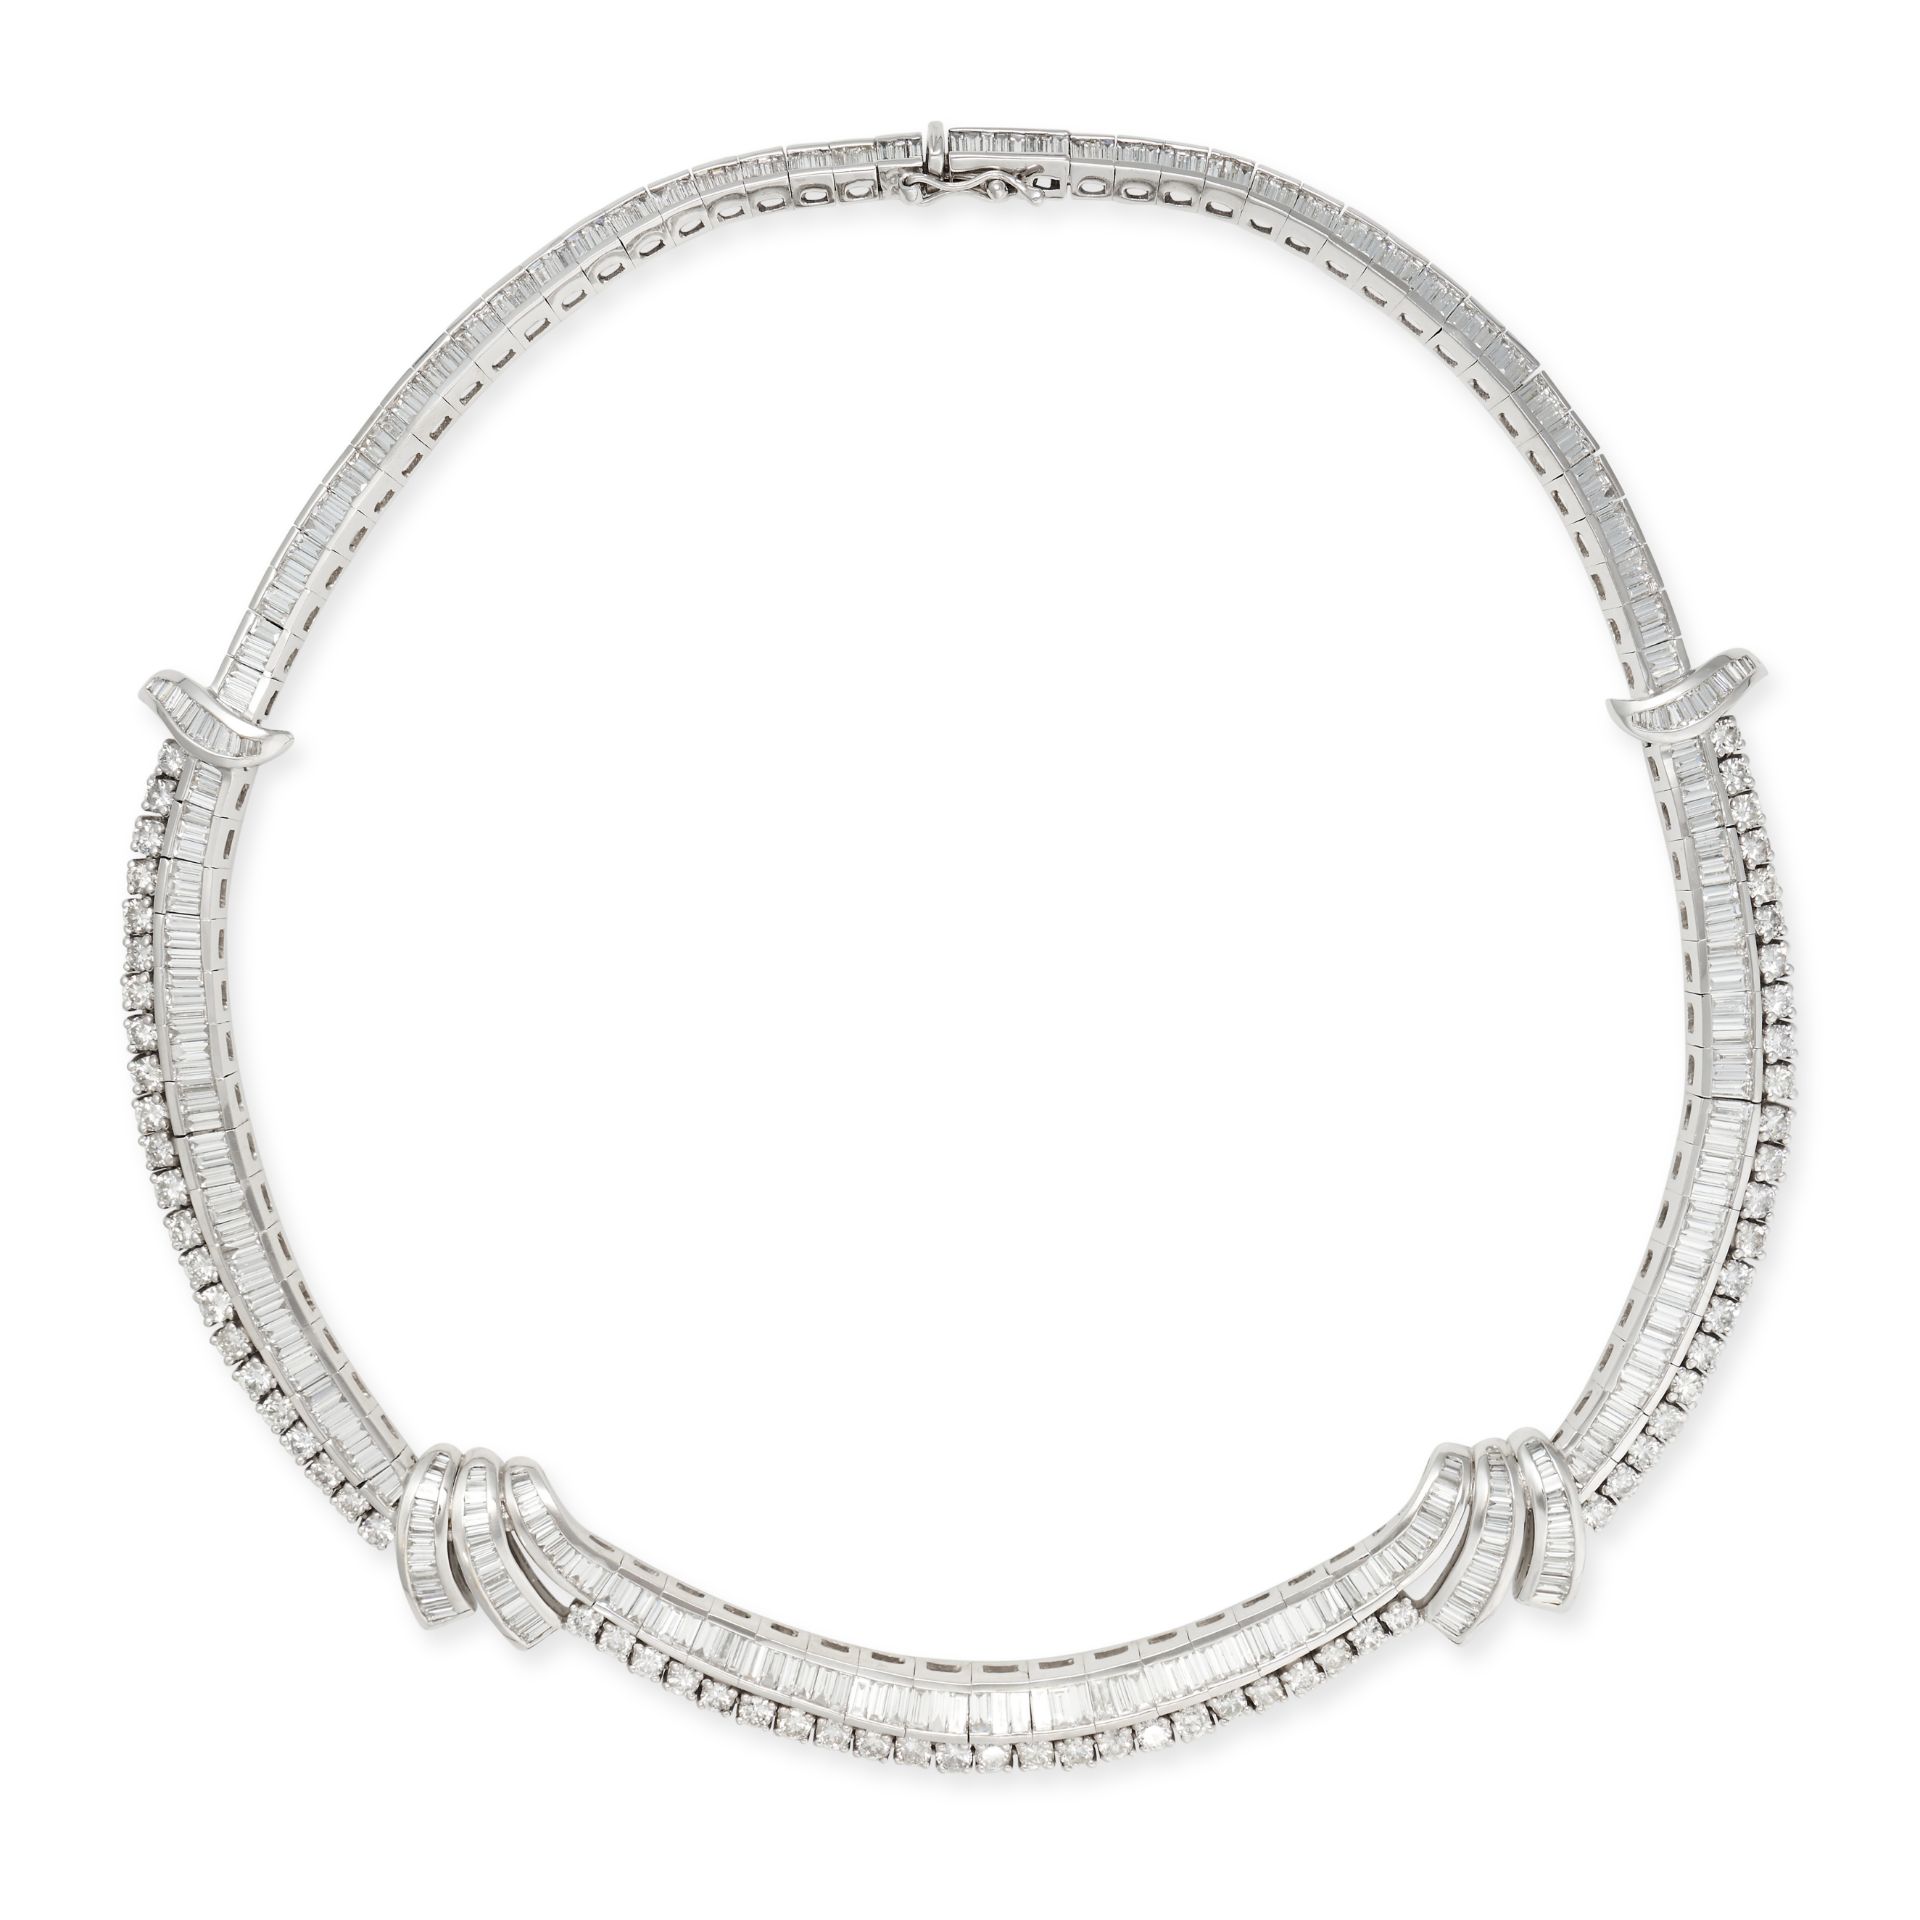 A DIAMOND NECKLACE in 18ct white gold, the necklace comprising two rows of baguette and round bri...